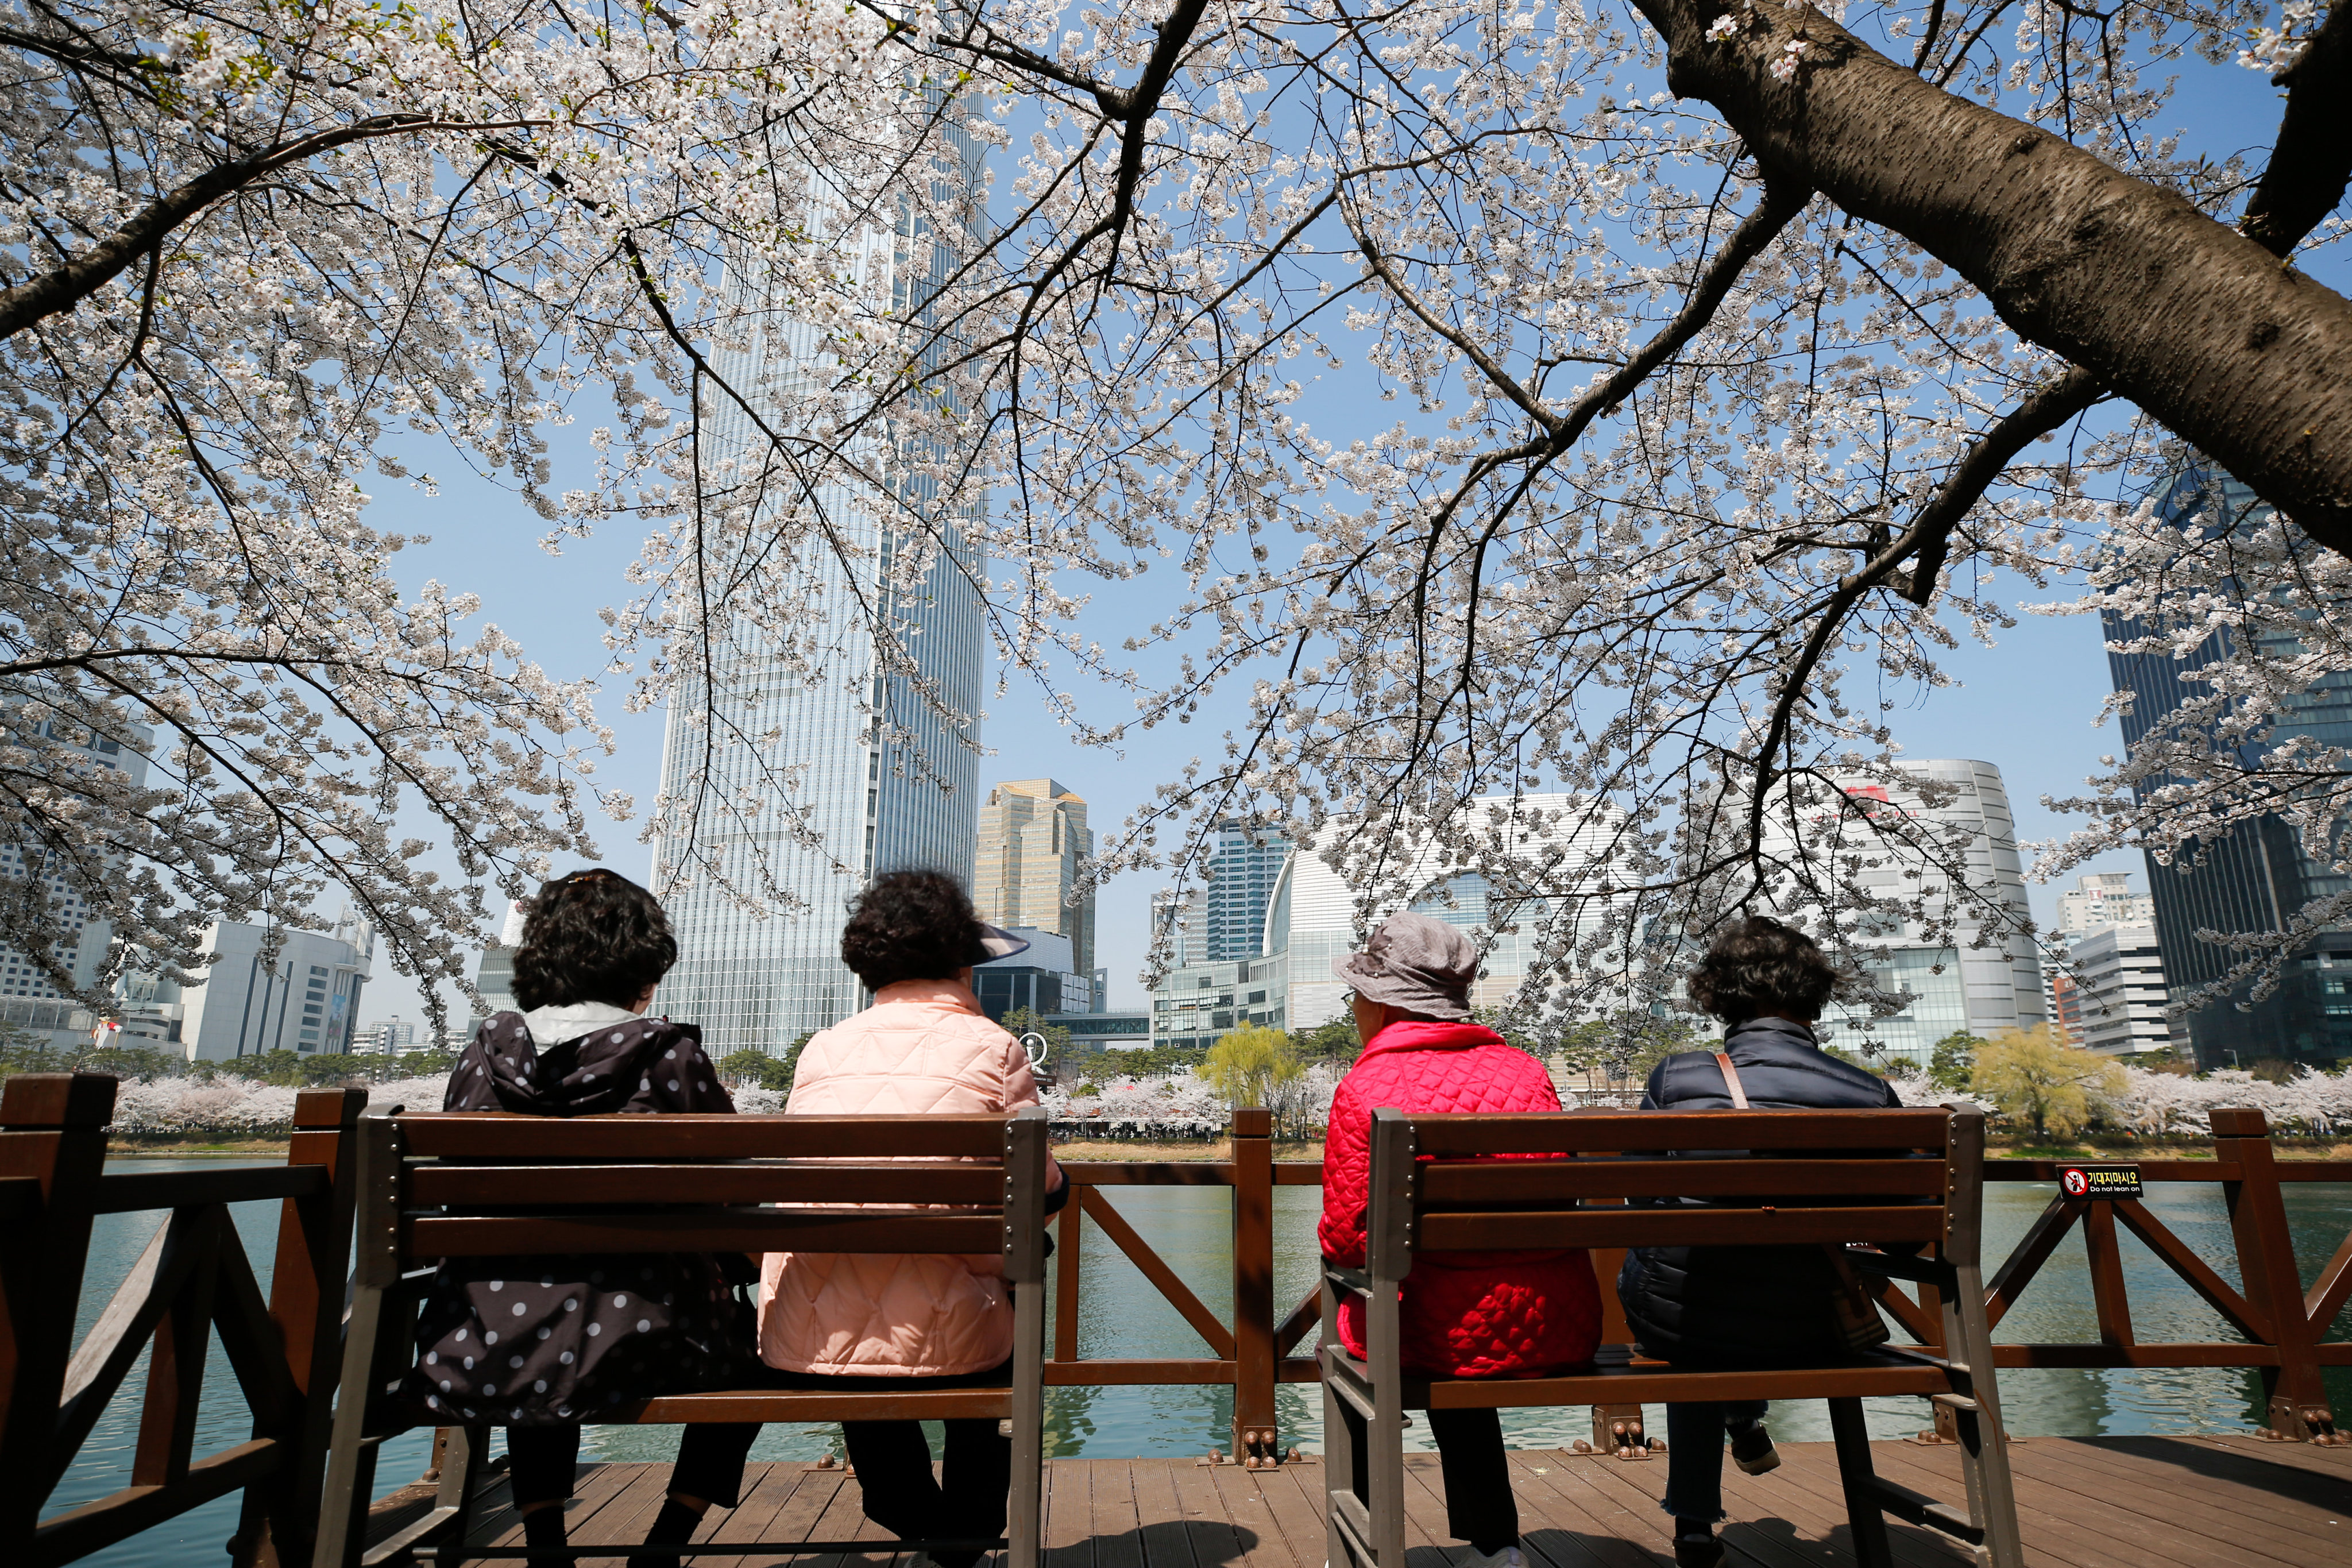 Tourists view cherry blossoms at Seokchon Lake Park, with office towers in the distance, in Seoul, South Korea, on March 30. Rents for grade A offices in Seoul’s central business districts are expected to rise around 5 per cent this year. Photo: Xinhua